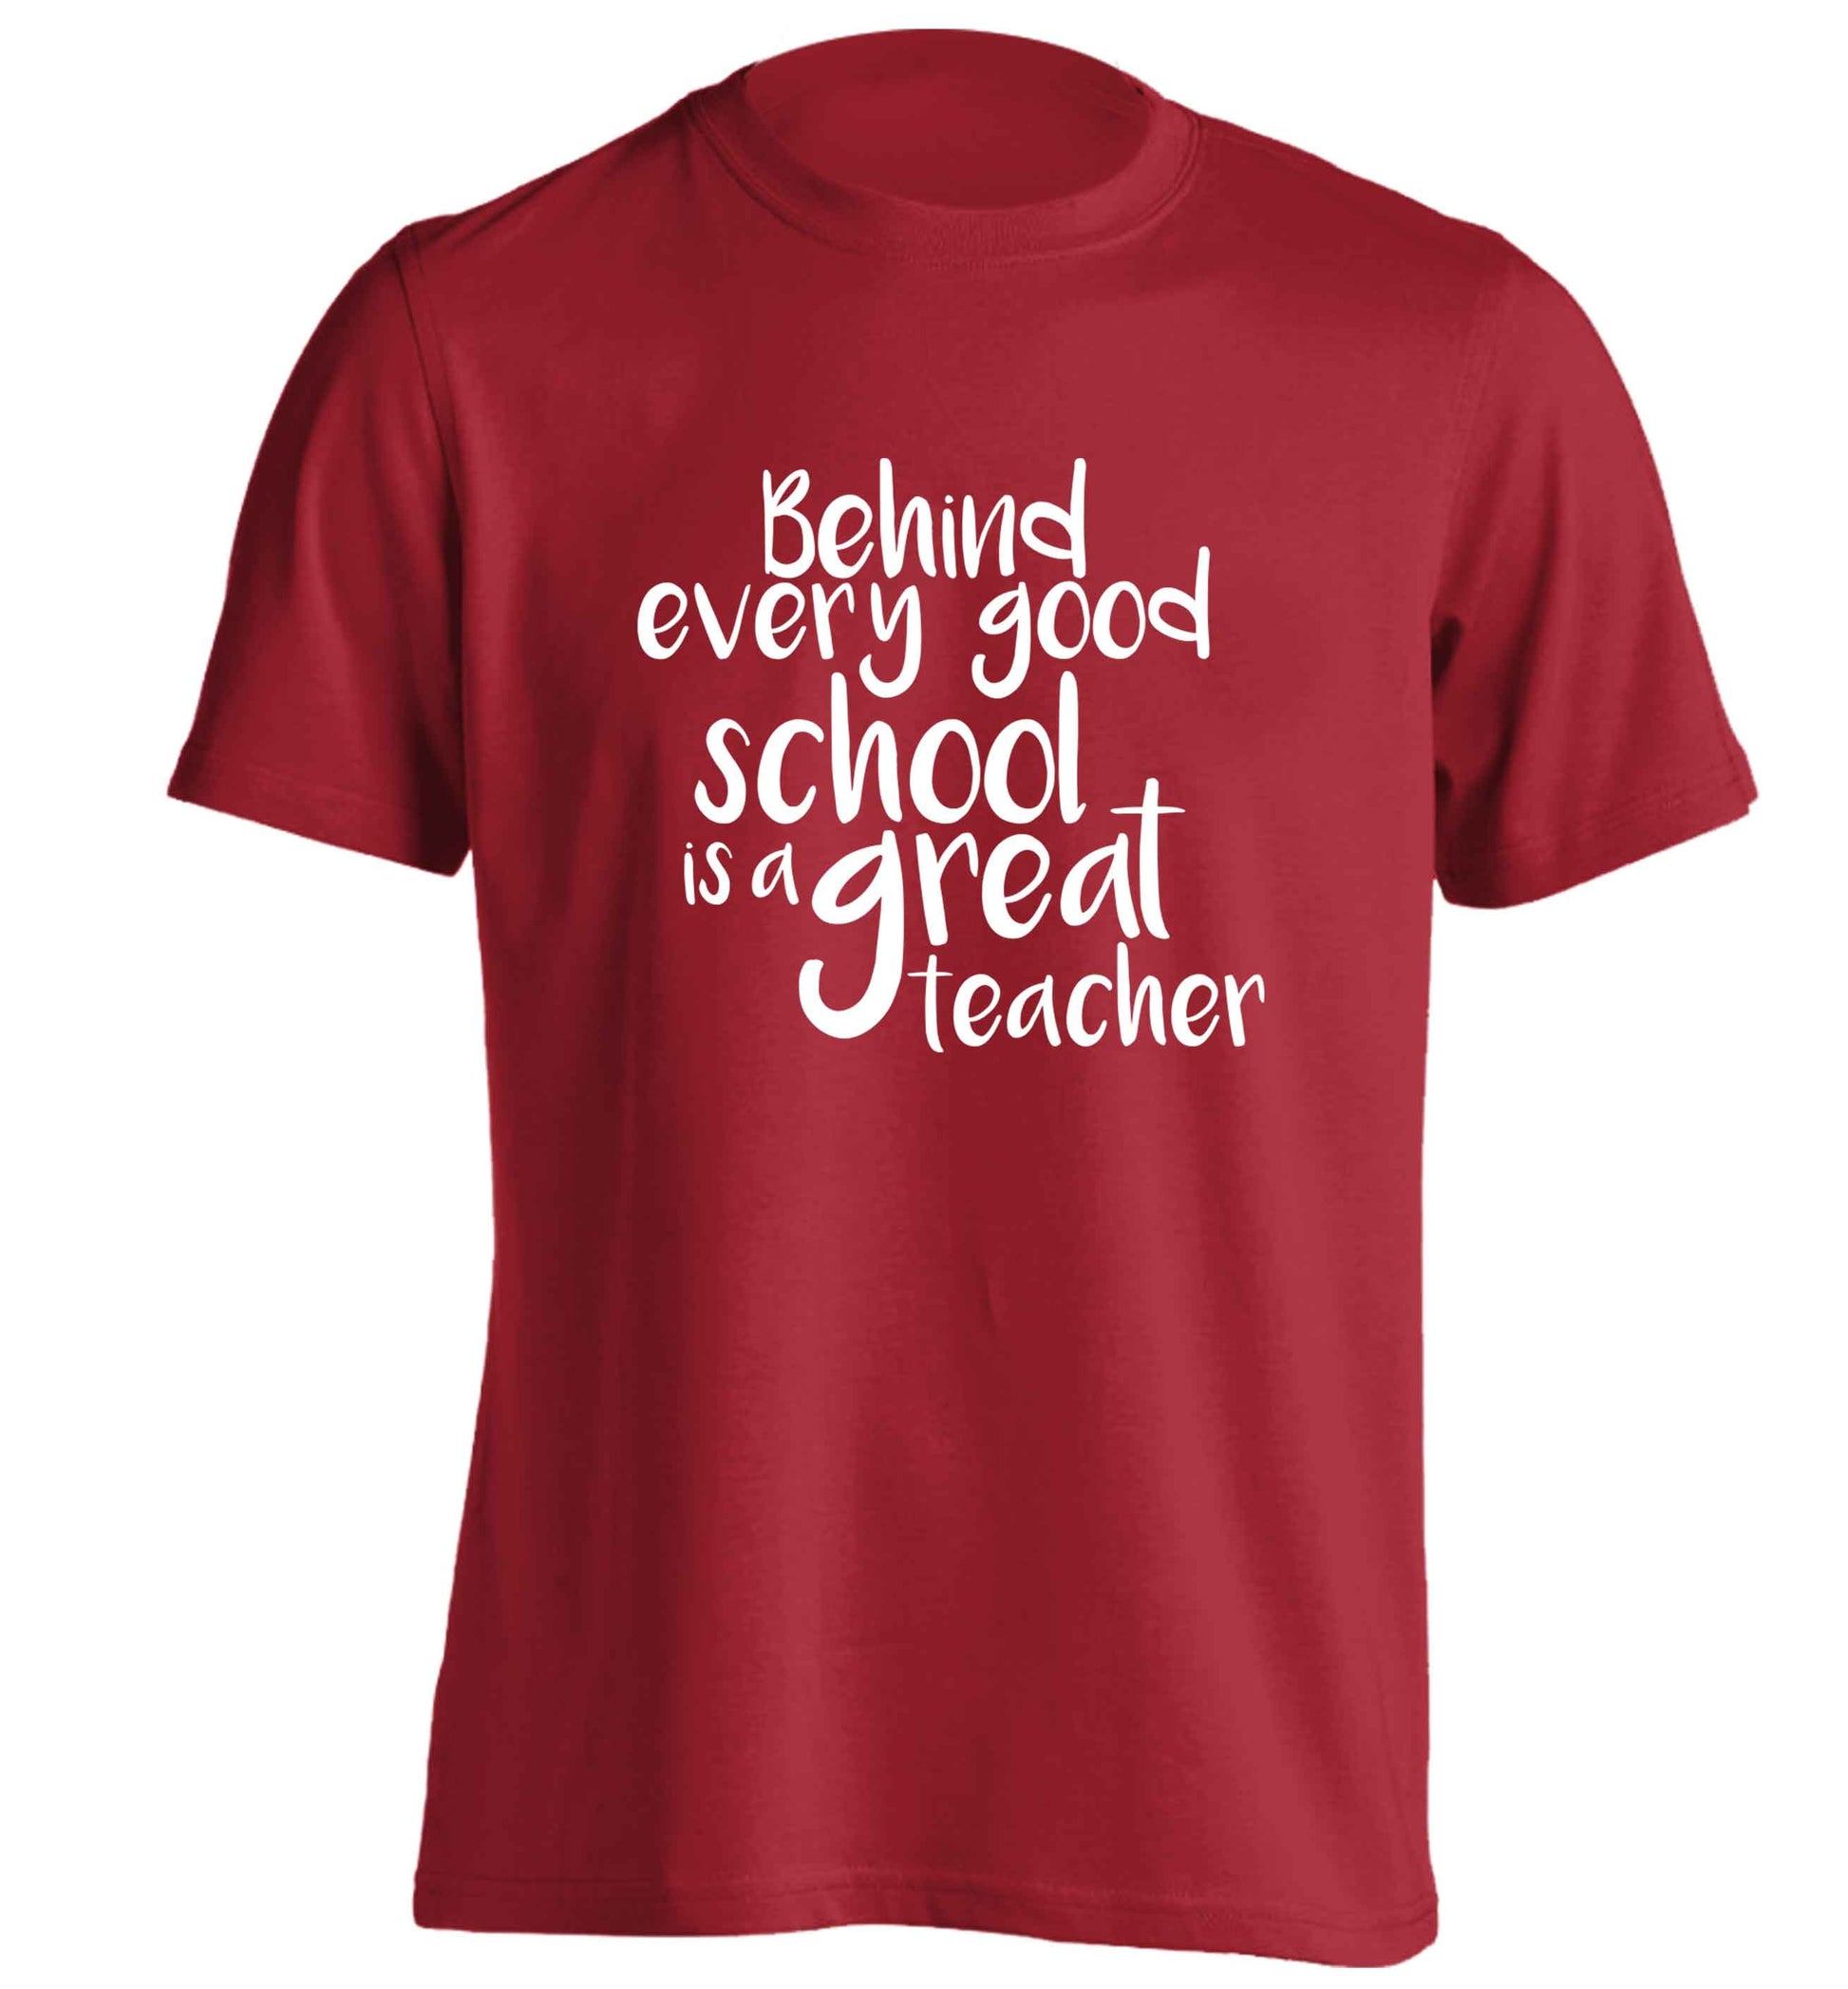 Behind every good school is a great teacher adults unisex red Tshirt 2XL